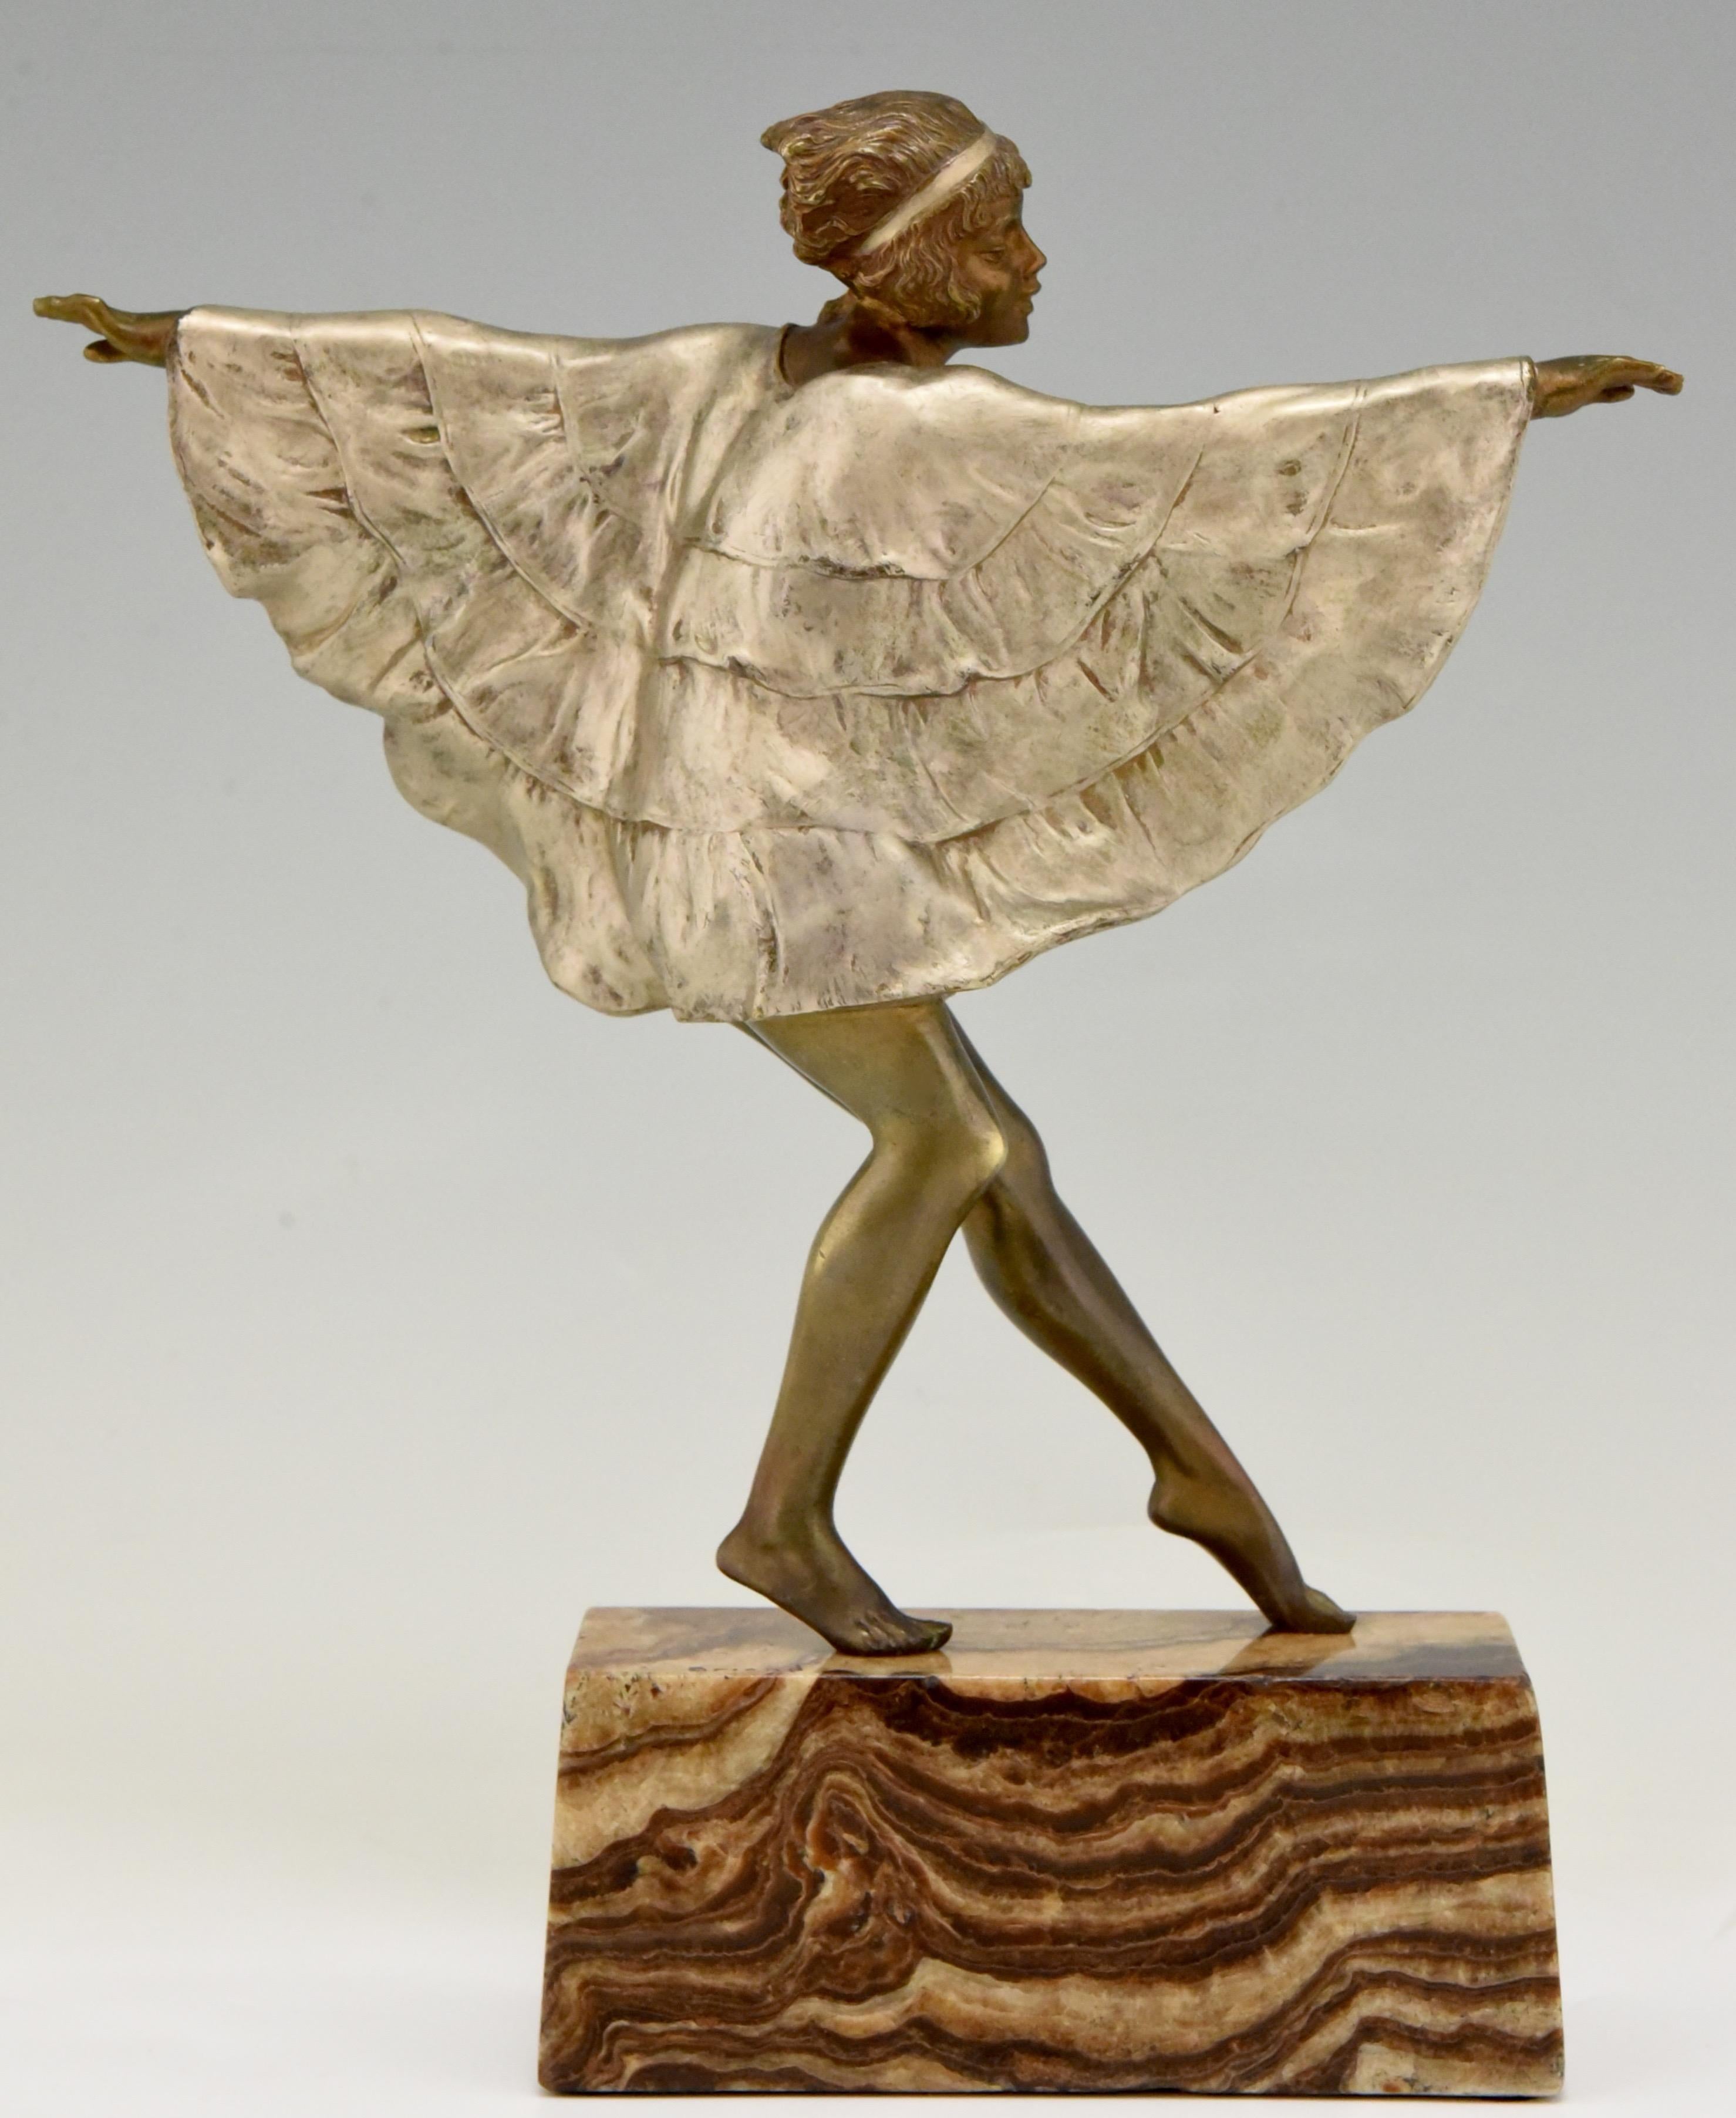 Early 20th Century Art Deco Bronze Sculpture Dancer with Butterfly Dress Marcel Andre Bouraine